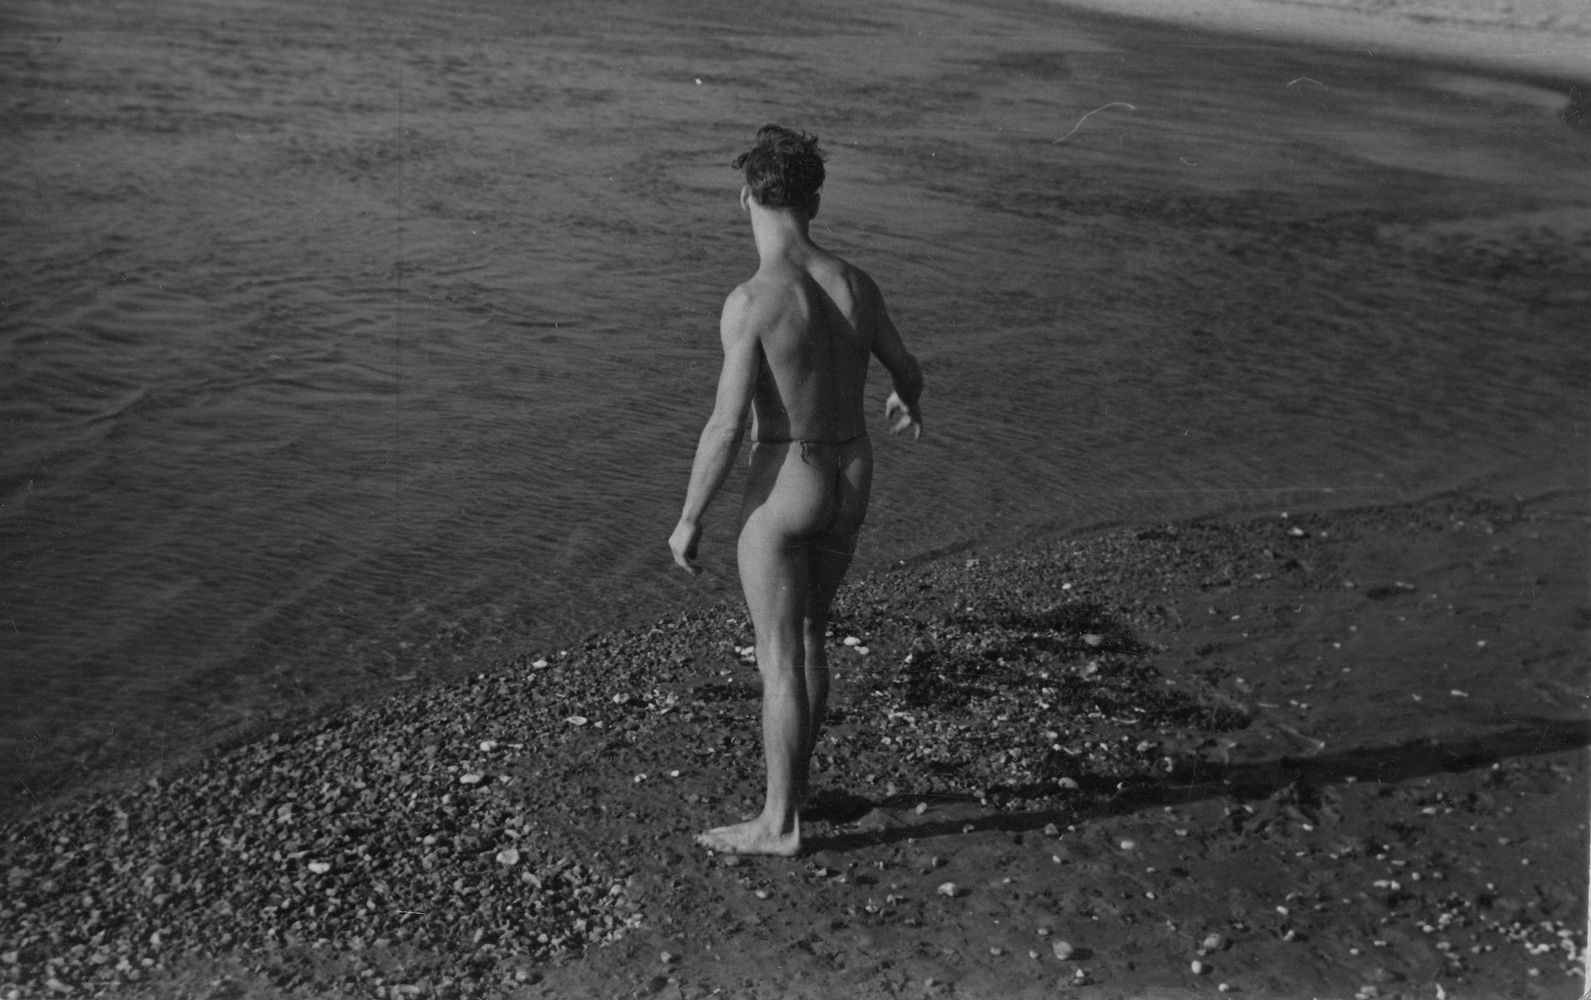 A male figure wearing loincloth standing at waters edge [P39]